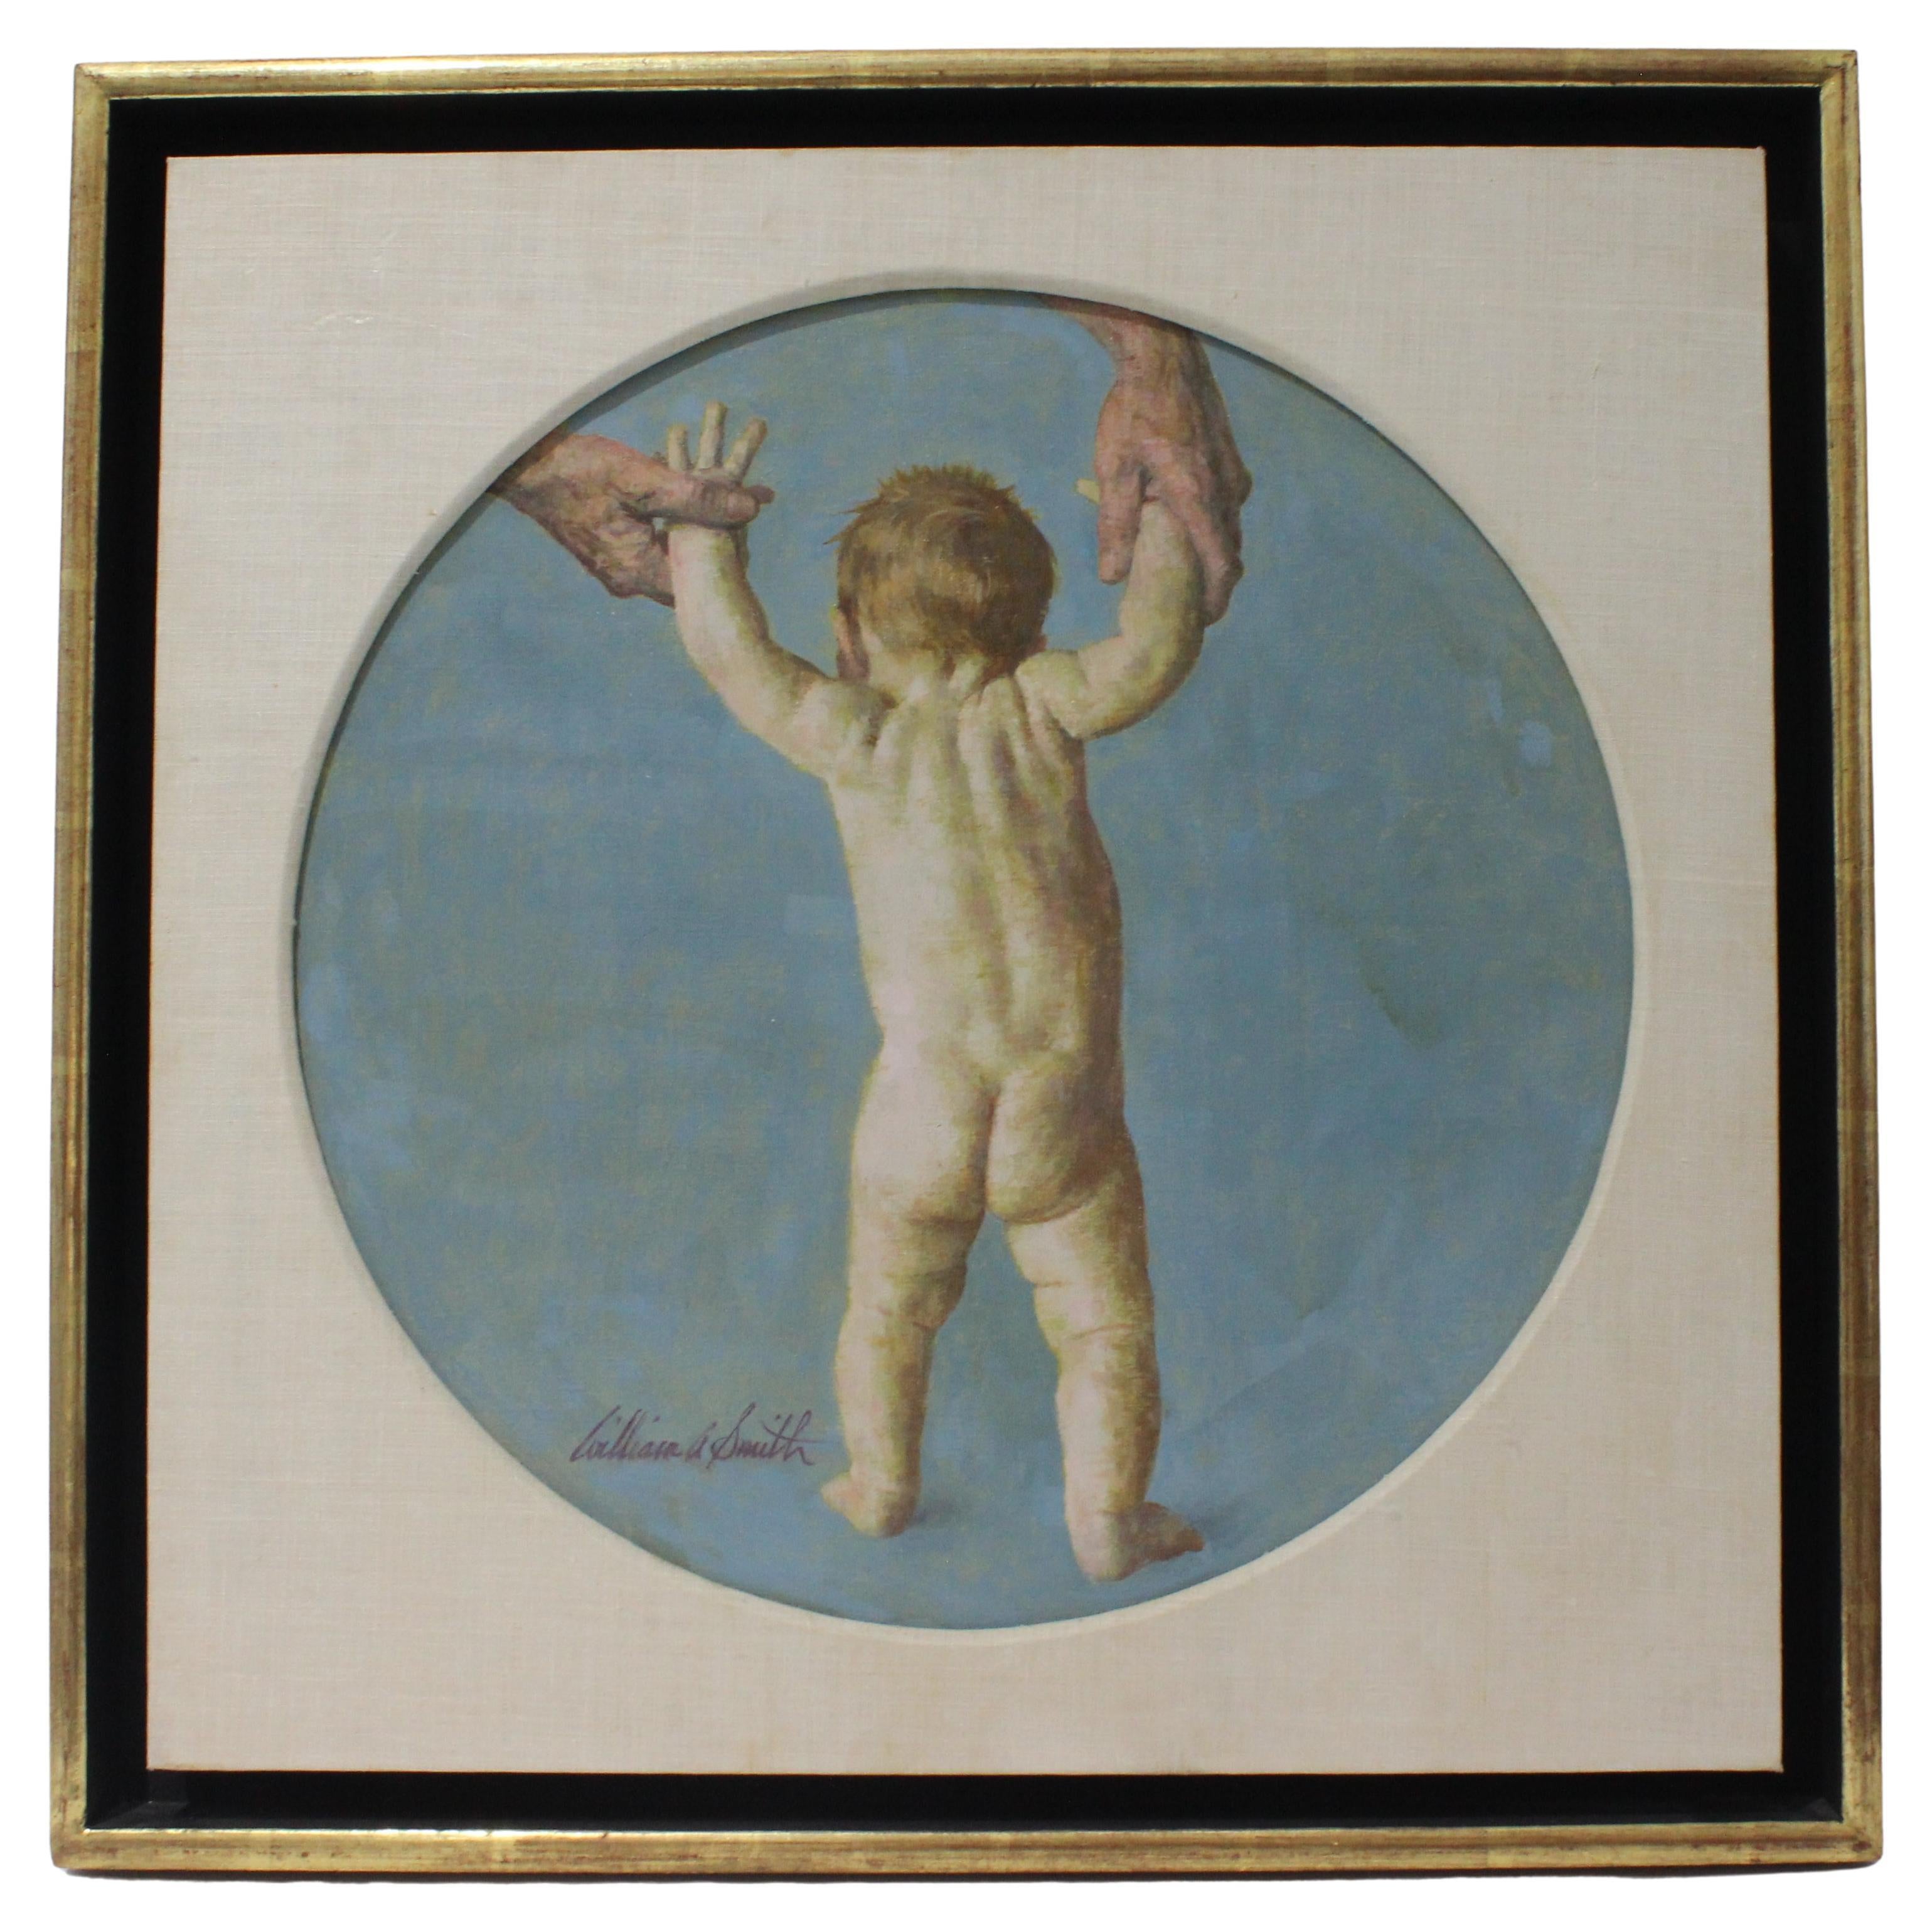 William A Smith Oil Painting of a Baby 